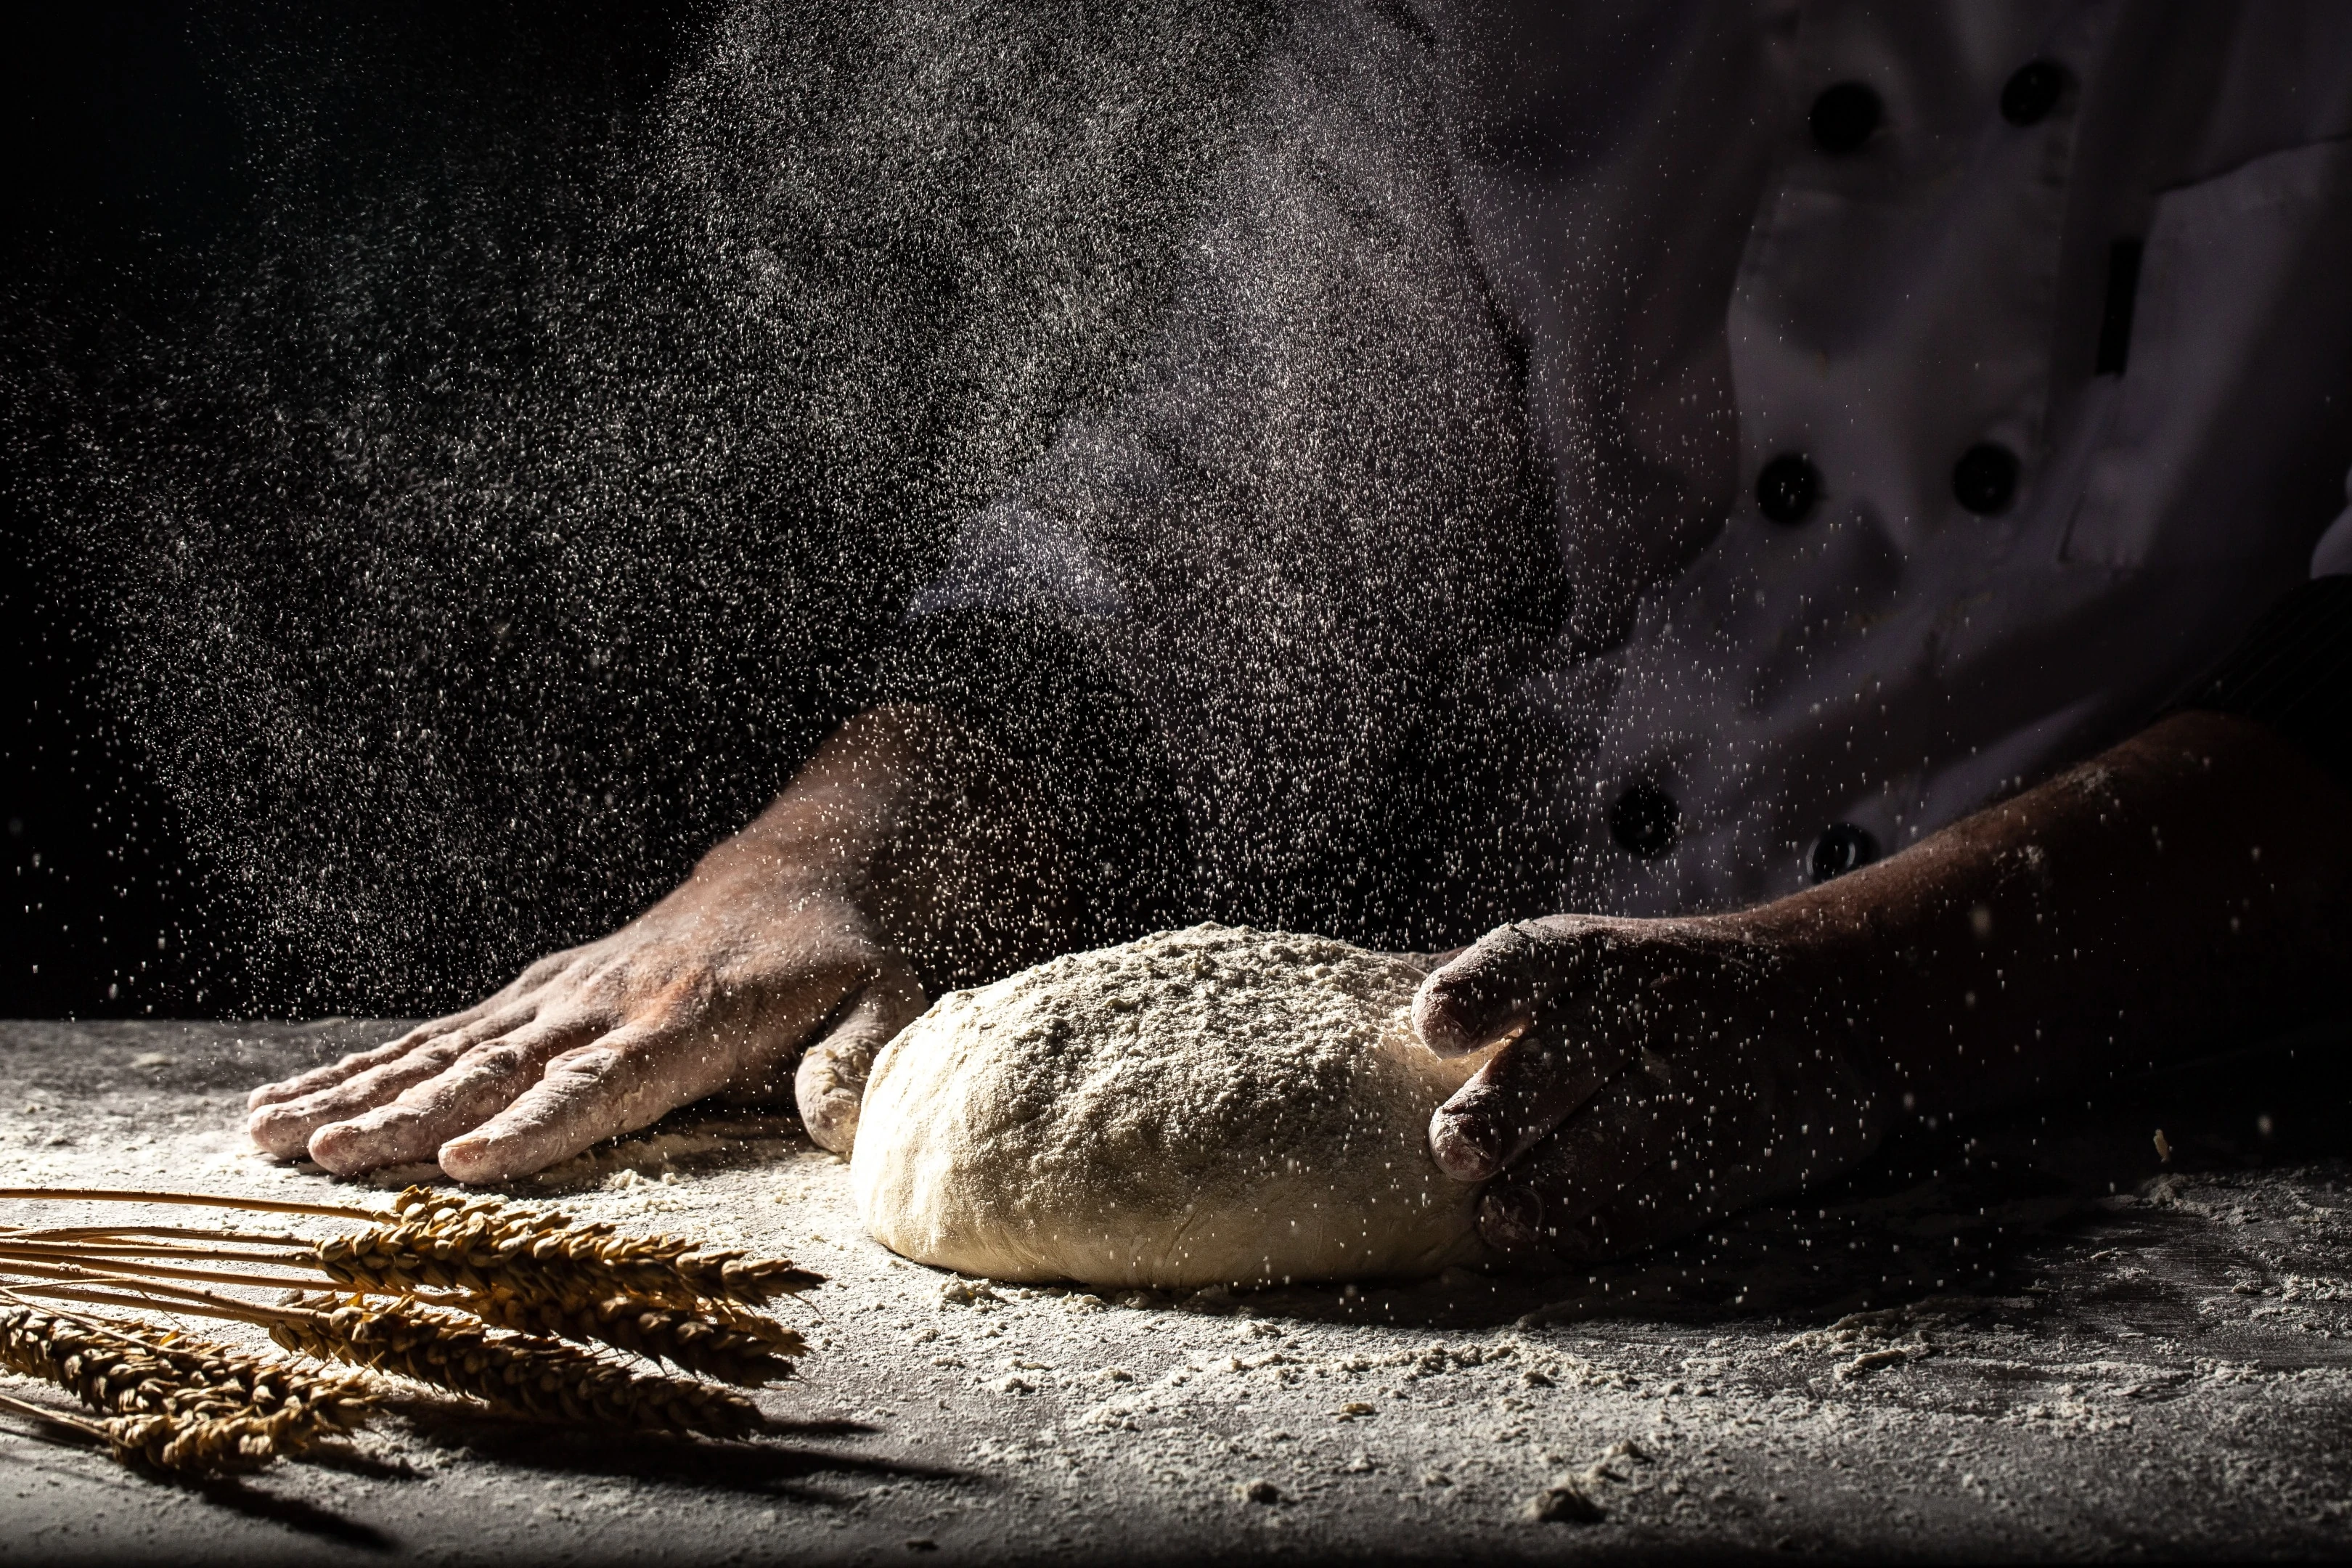 White flour flying into air as pastry chef slams ball of dough with white flour